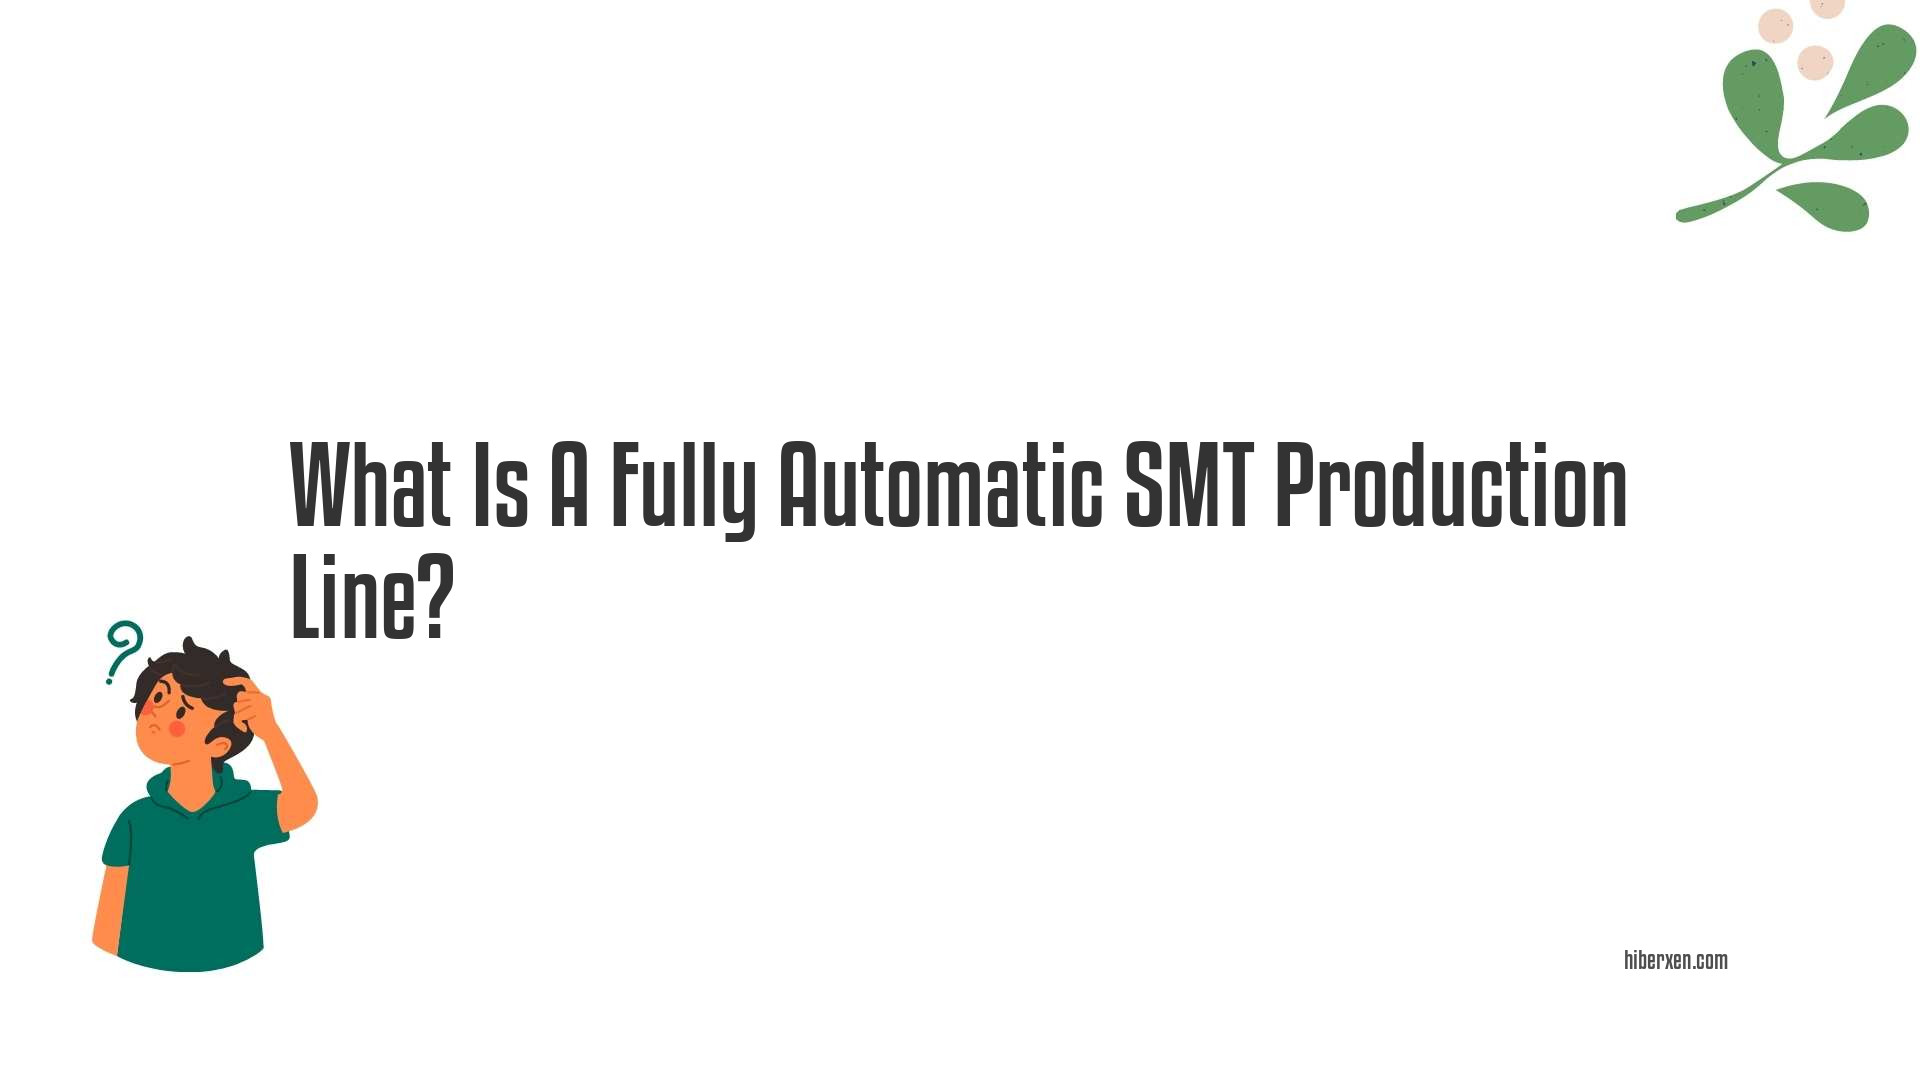 What Is A Fully Automatic SMT Production Line?